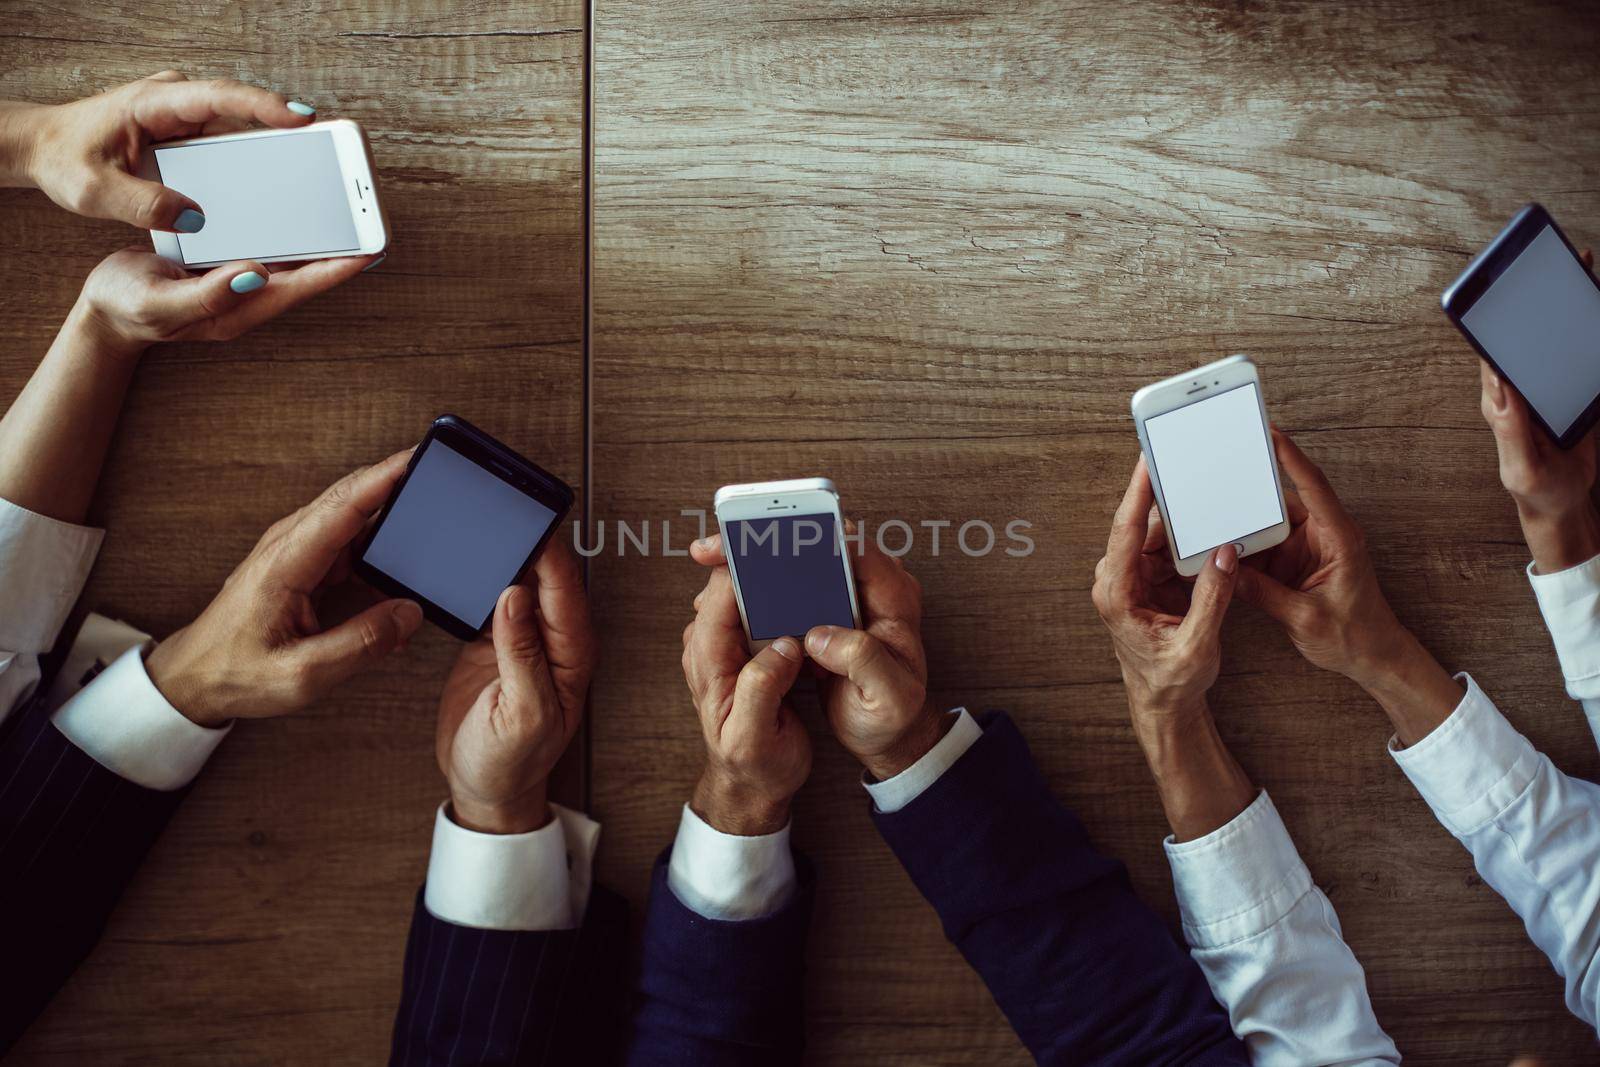 Business people using mobile phones. Human hands holding smartphones with empty screens on wooden desk background. High angle view. Toned image.